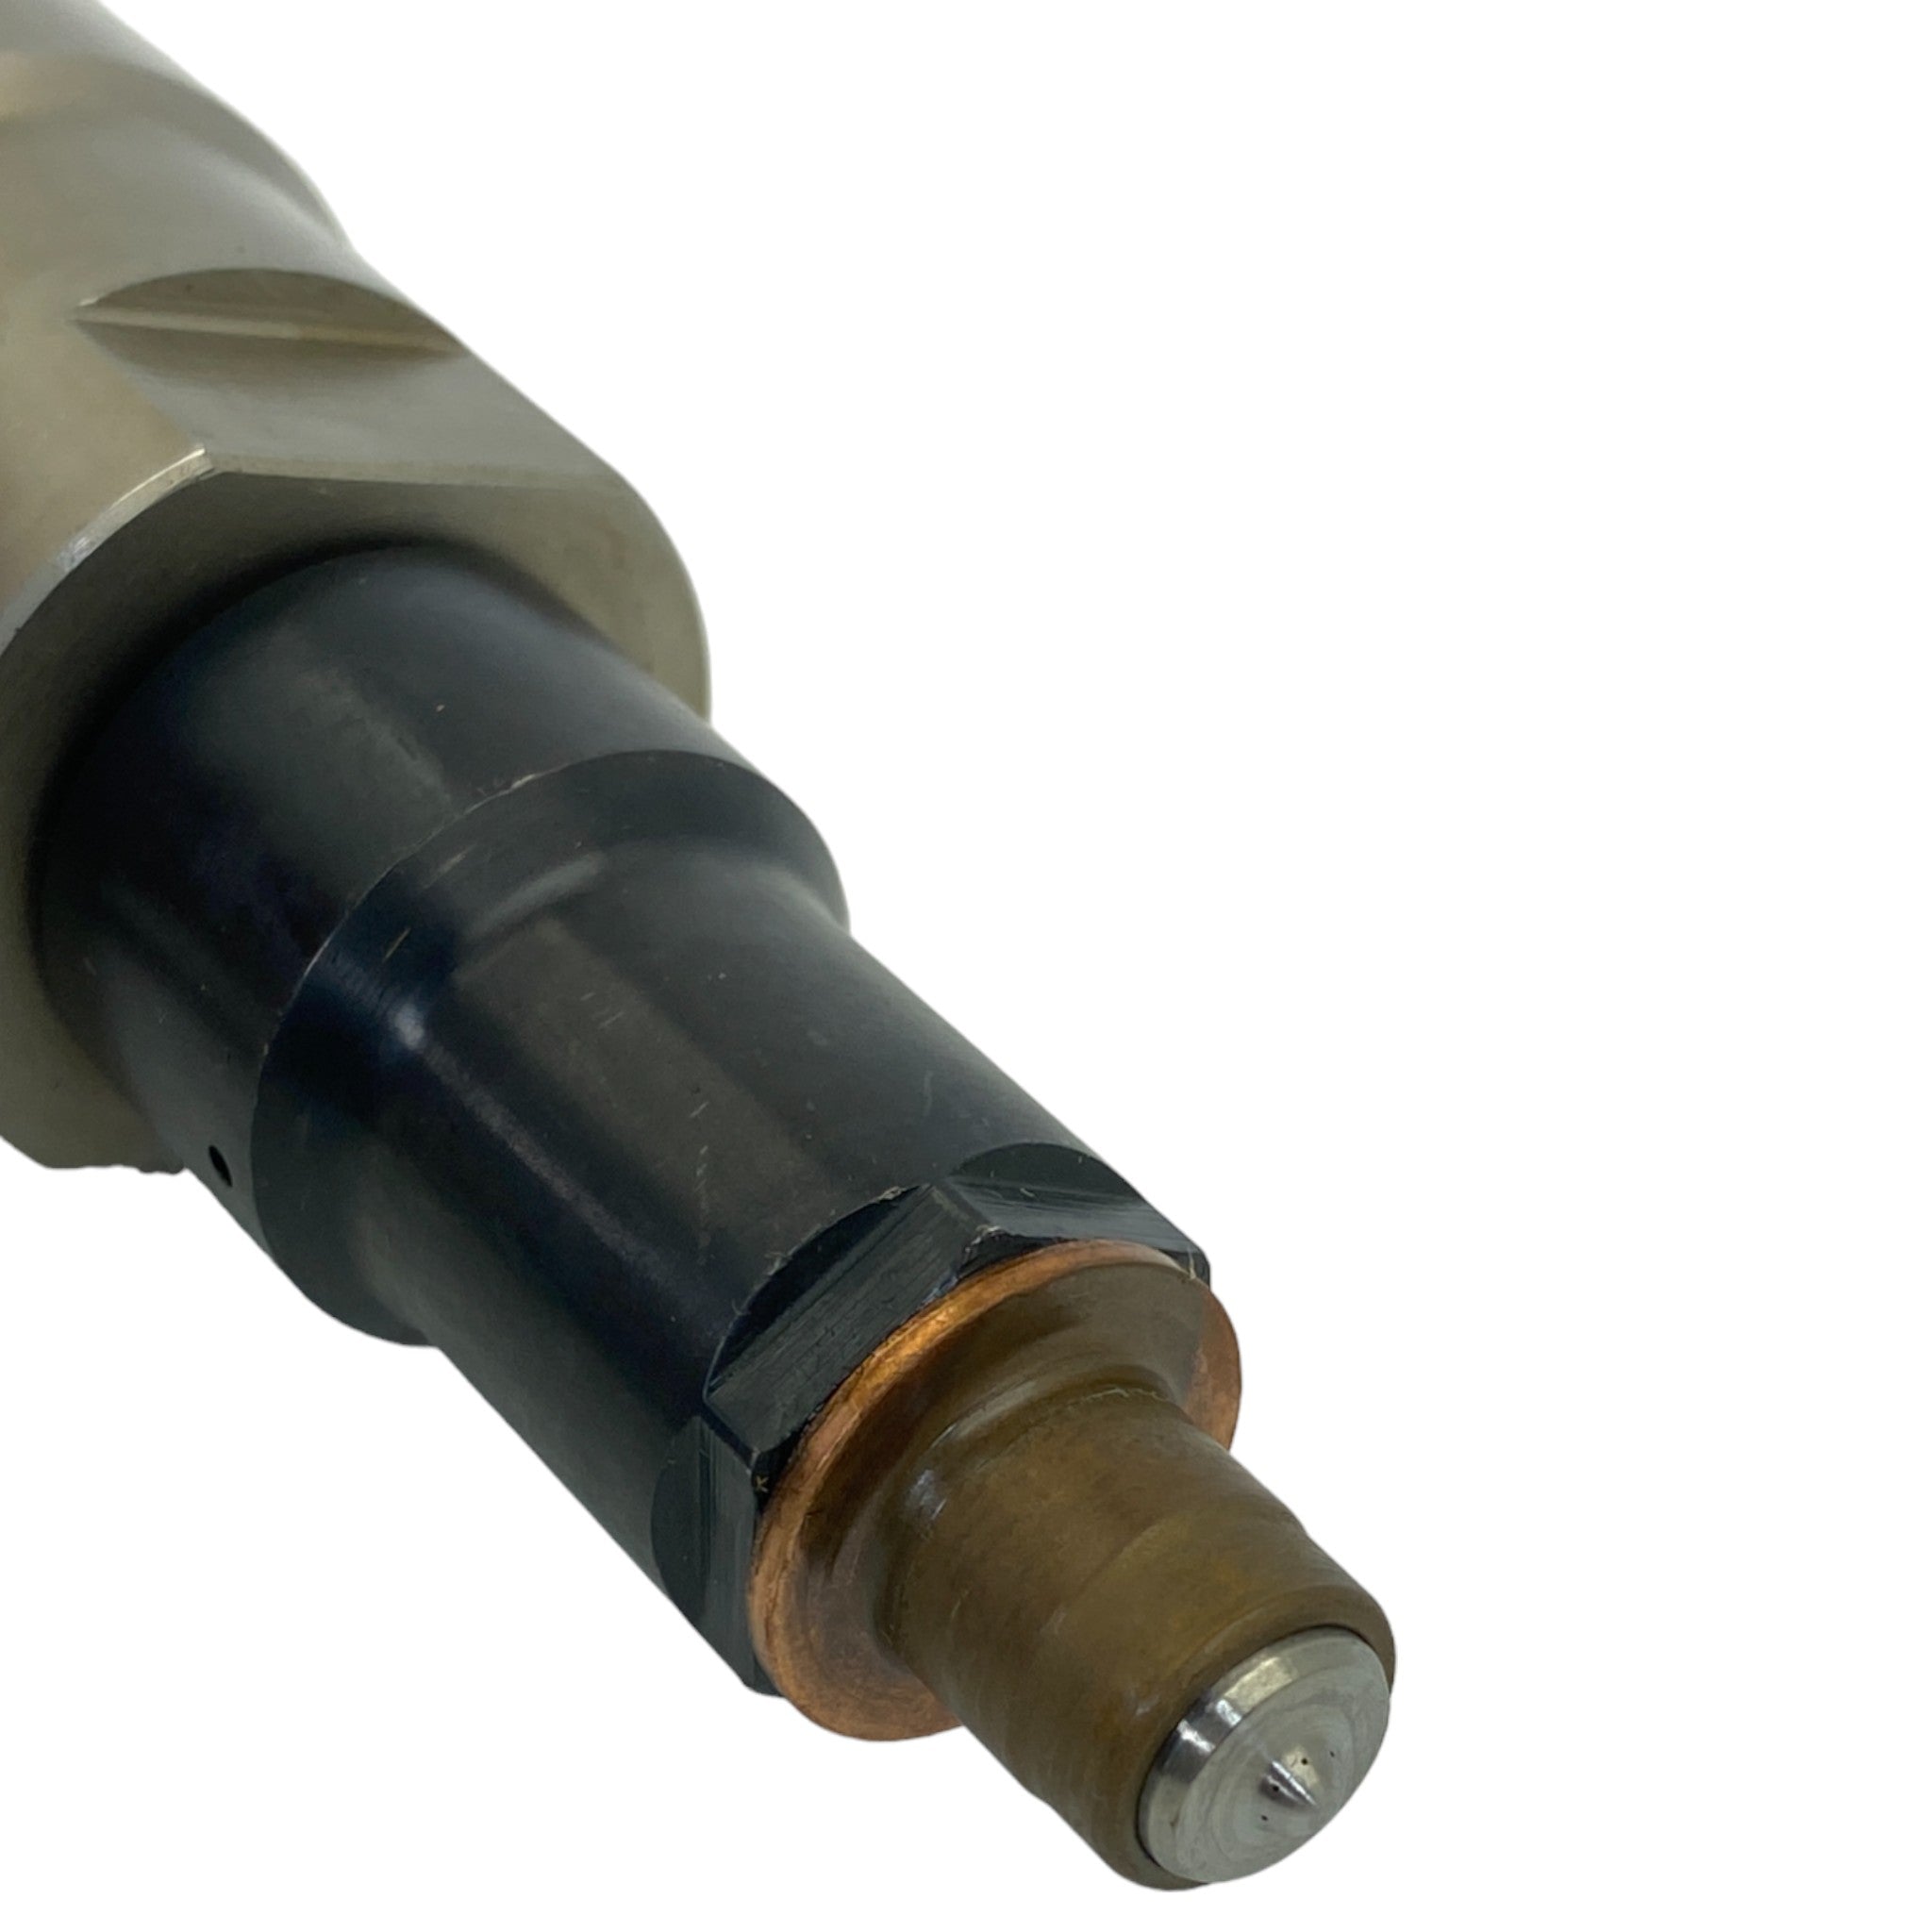 2897320 Oem Cummins Fuel Injector For Xpi Fuel Systems On Epa13 15L Isx/Qsx Engines